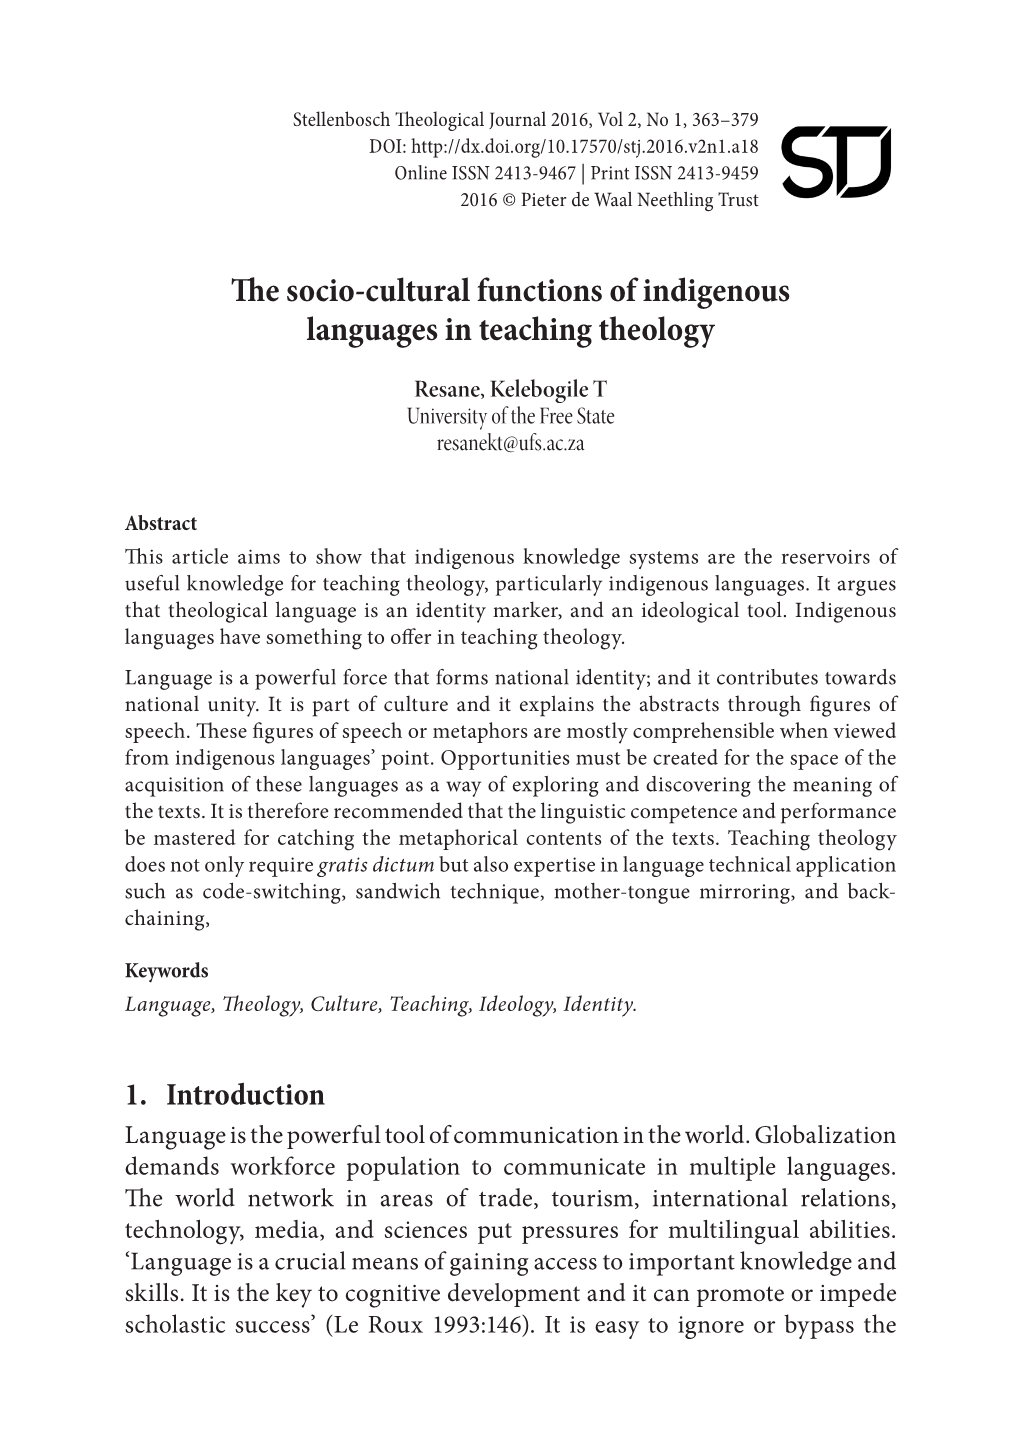 The Socio-Cultural Functions of Indigenous Languages in Teaching Theology